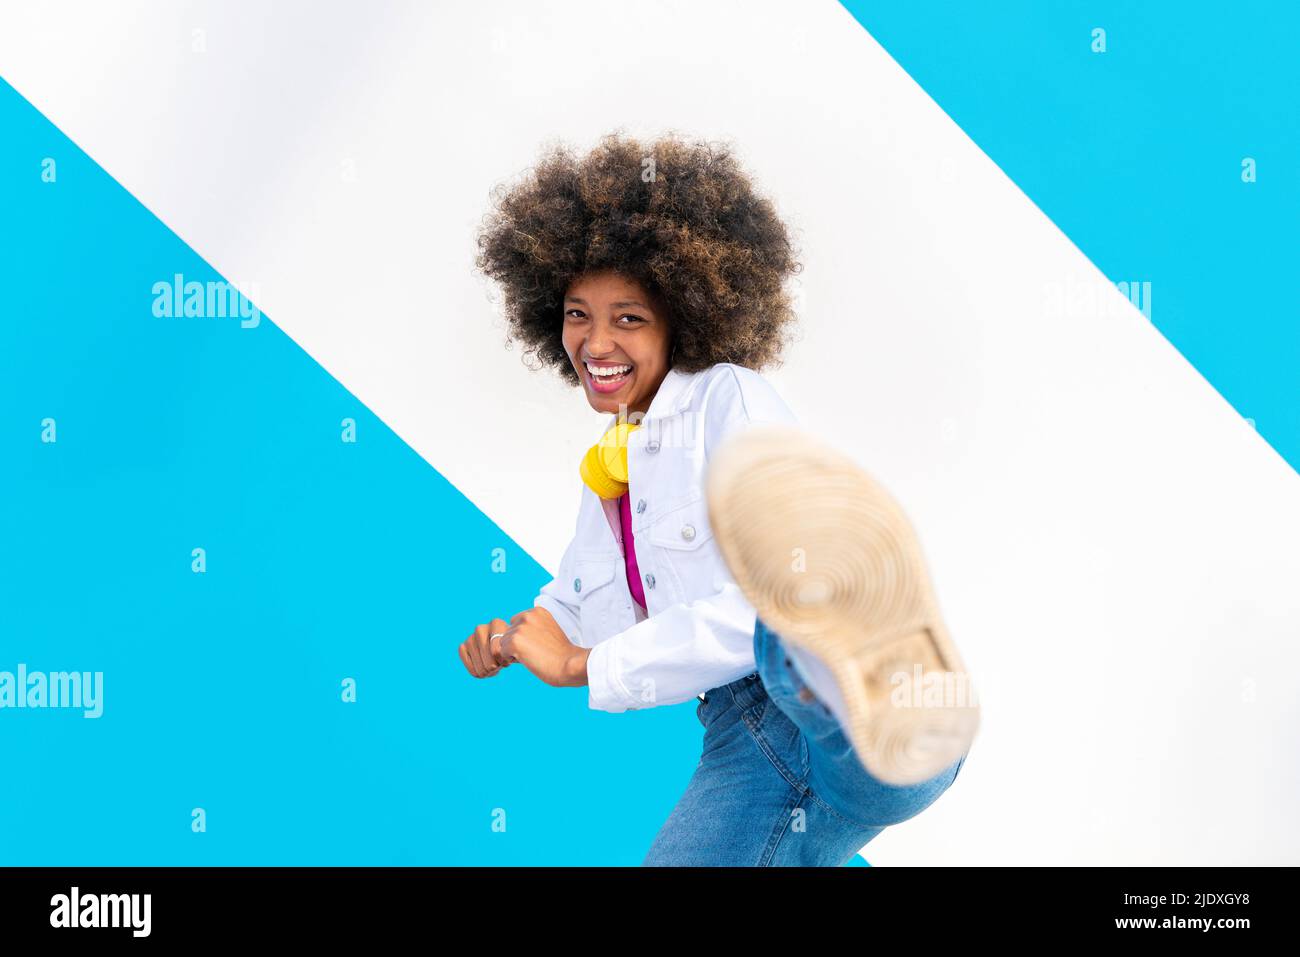 Happy young Afro woman kicking in front of blue and white wall Stock Photo